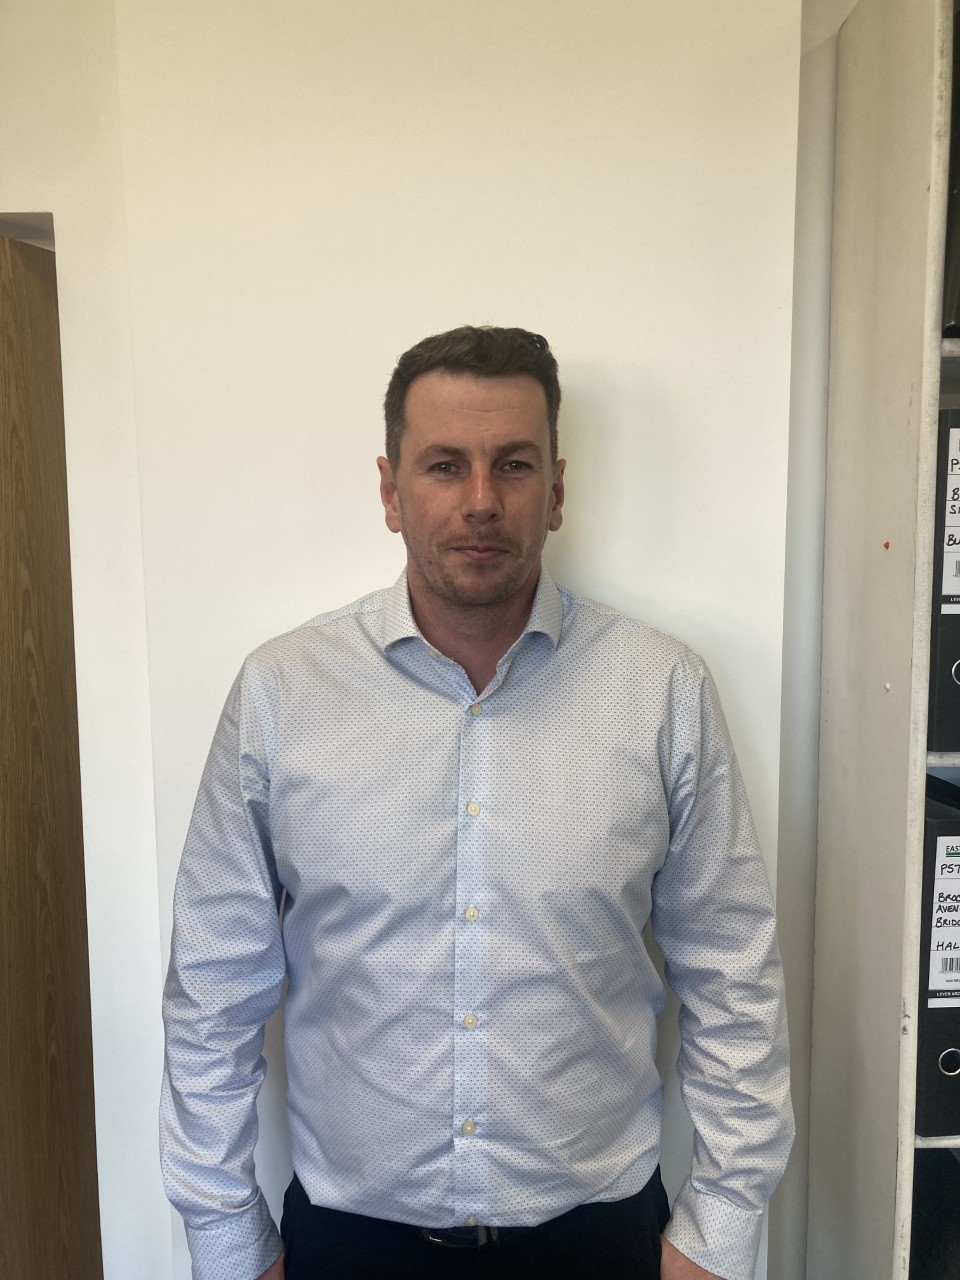 Our new Commercial Manager Gareth Whitney